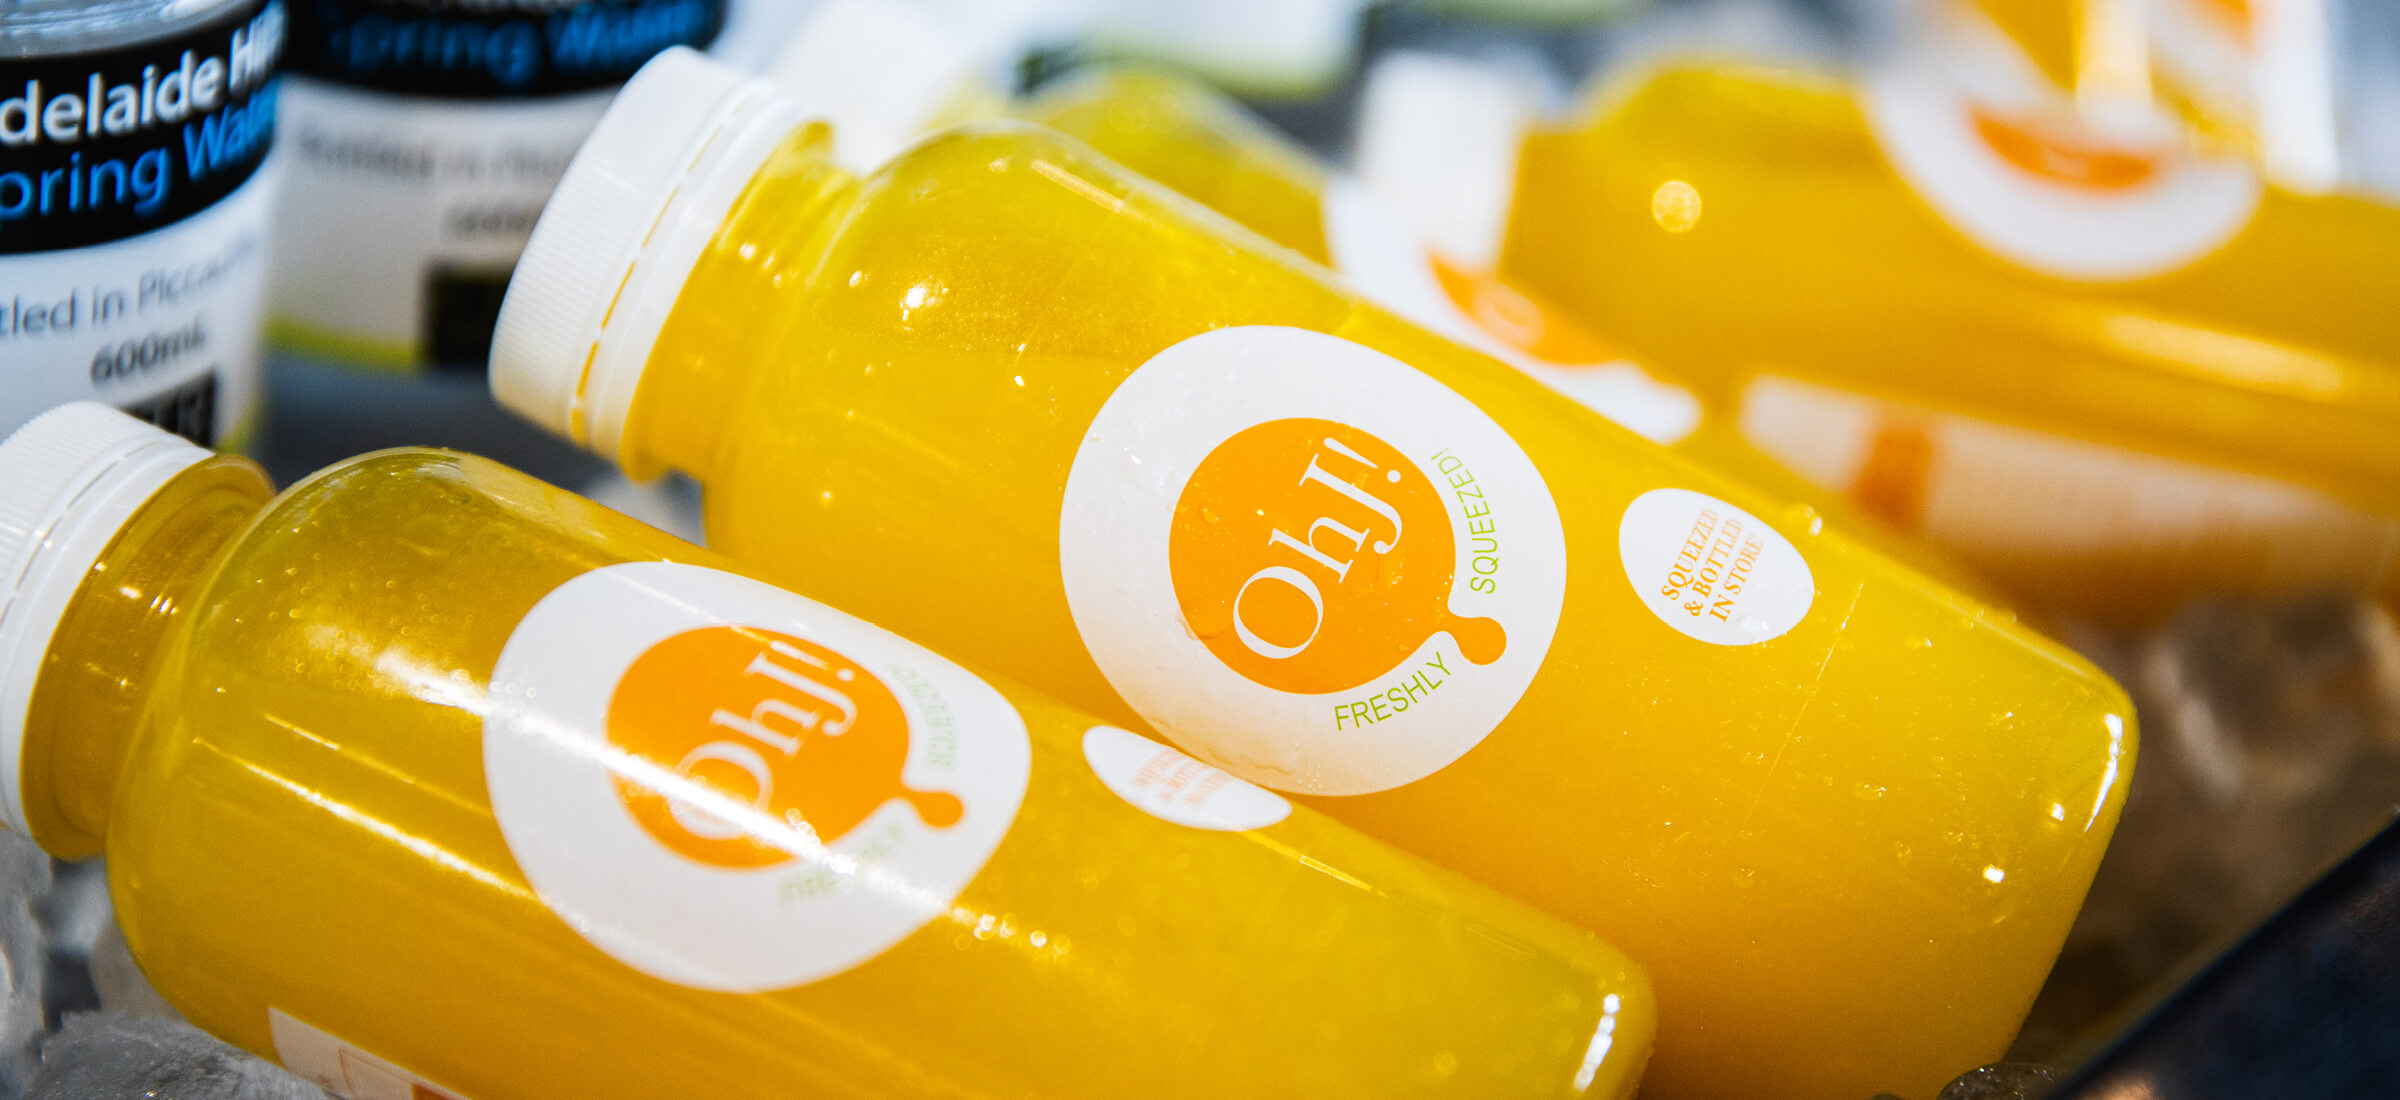 OhJ! - freshly squeezed orange juice with no added sugar or preservatives